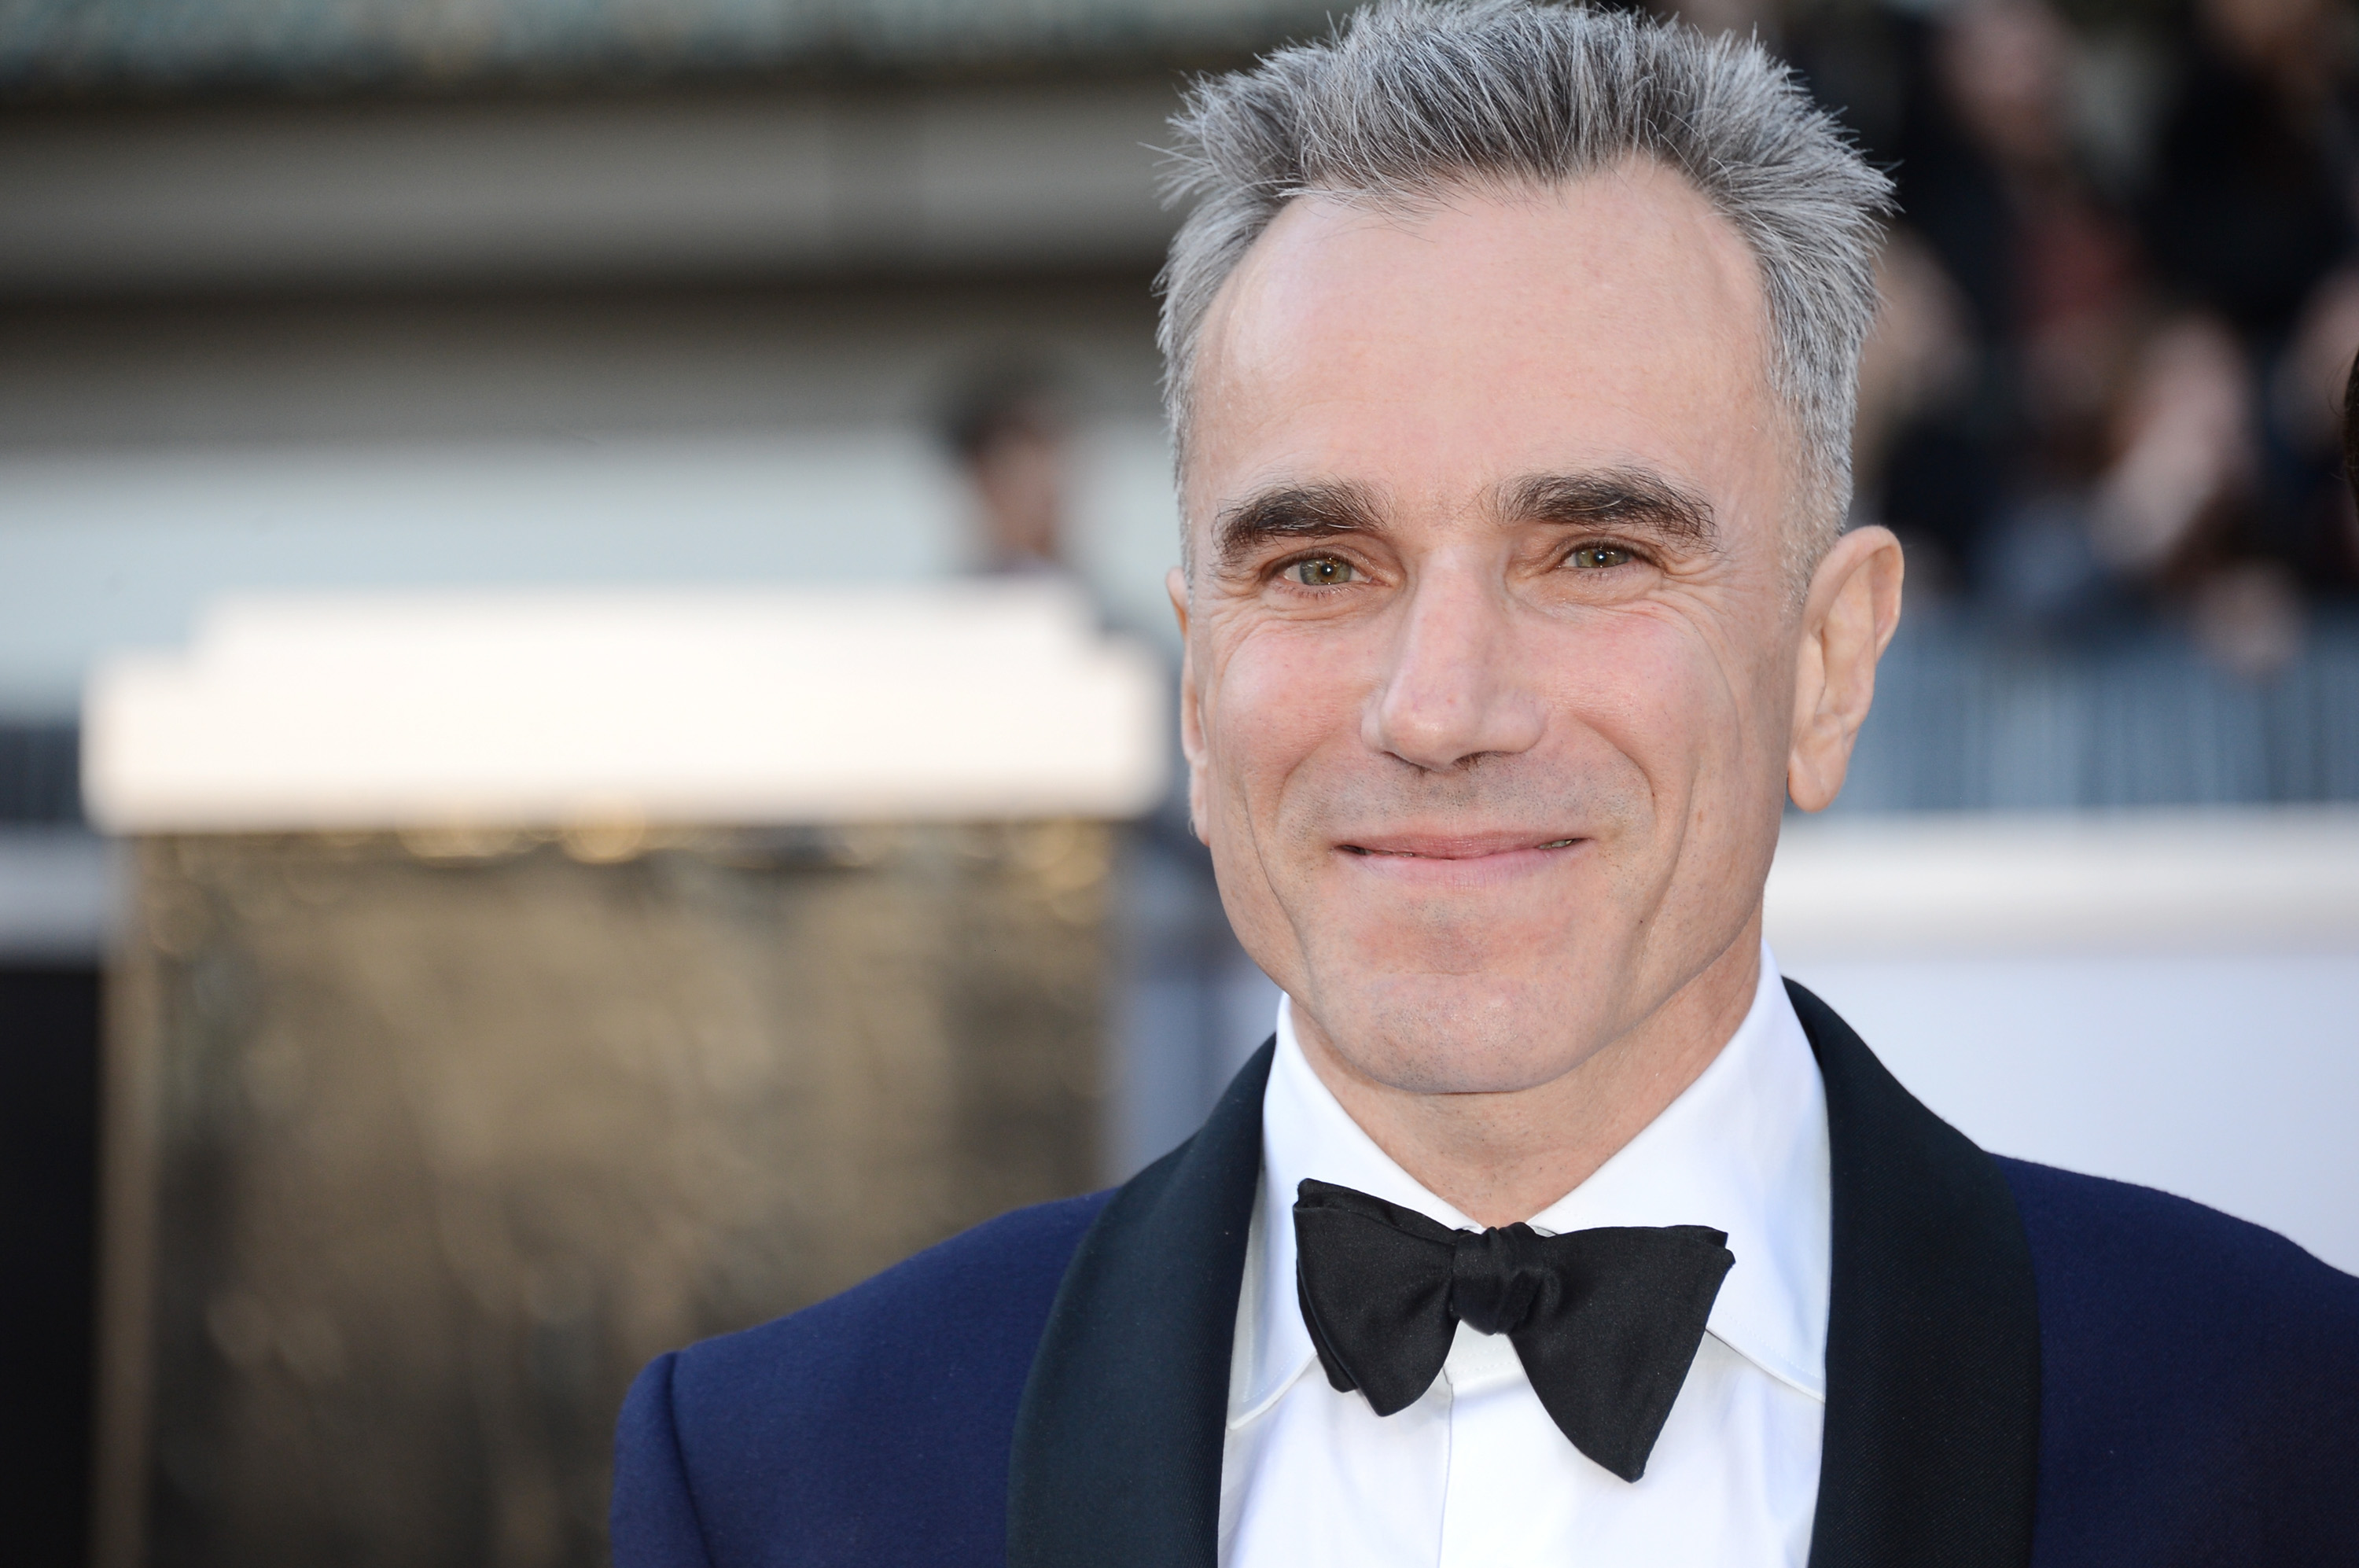 Actor Daniel Day-Lewis at the Oscars on February 24, 2013 in Hollywood, California | Source: Getty Images